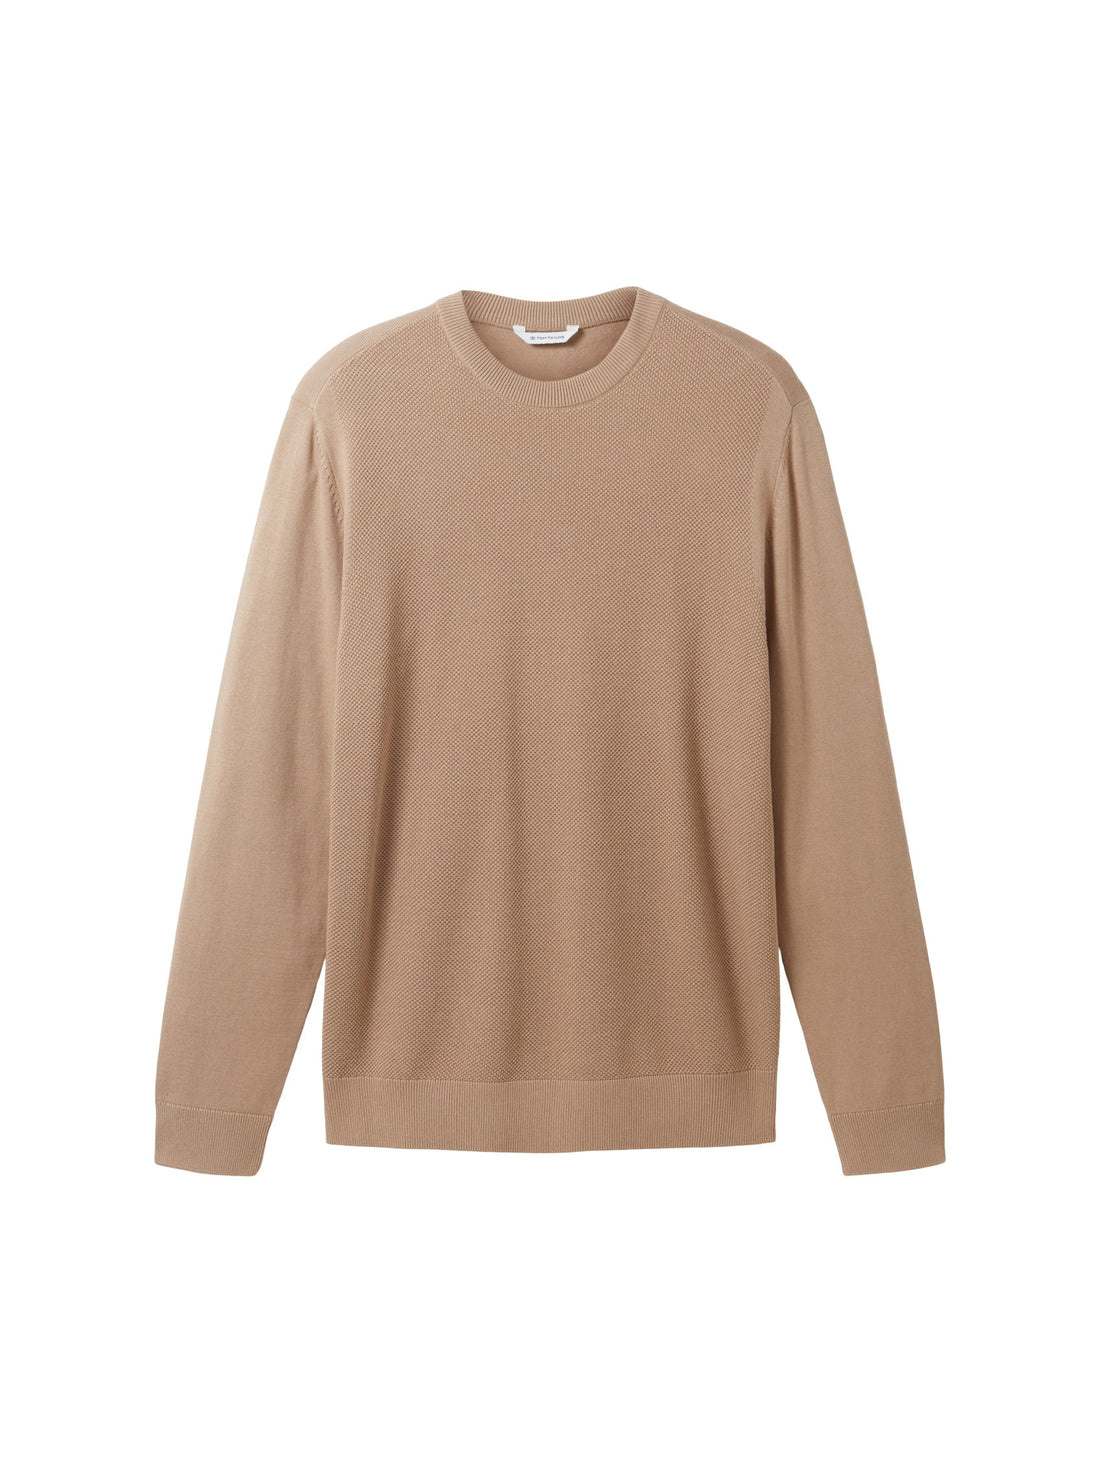 Knitted Pullover With Round Neckline_1038198_10942_01